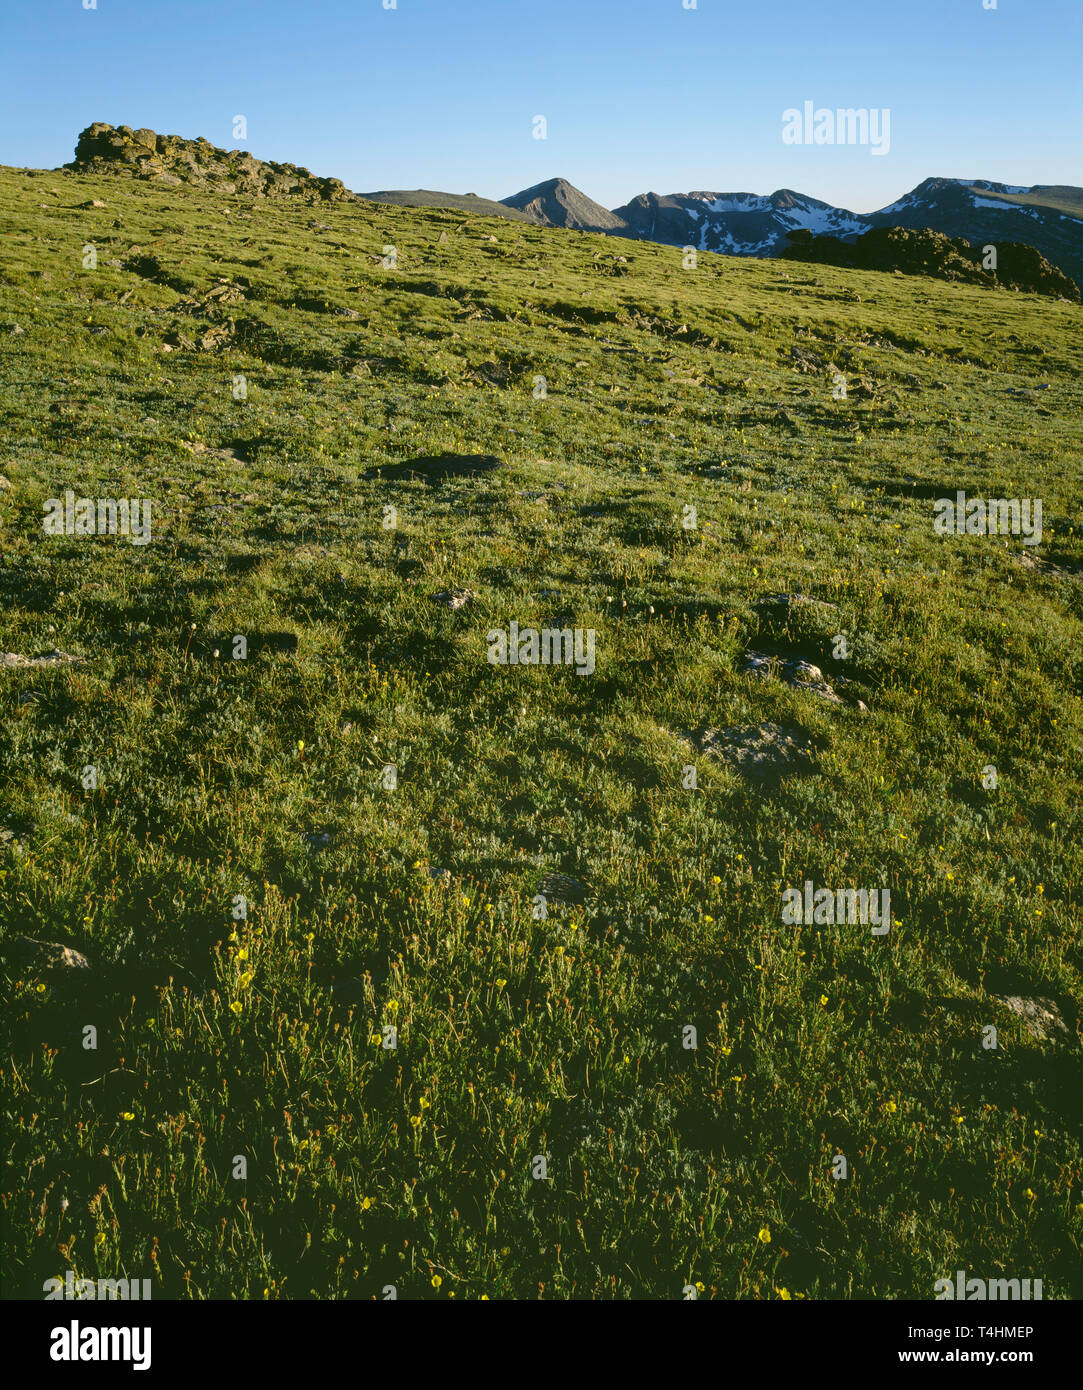 USA, Colorado, Rocky Mountain National Park, Alpine tundra and distant peaks, view south from the Tundra Trail. Stock Photo